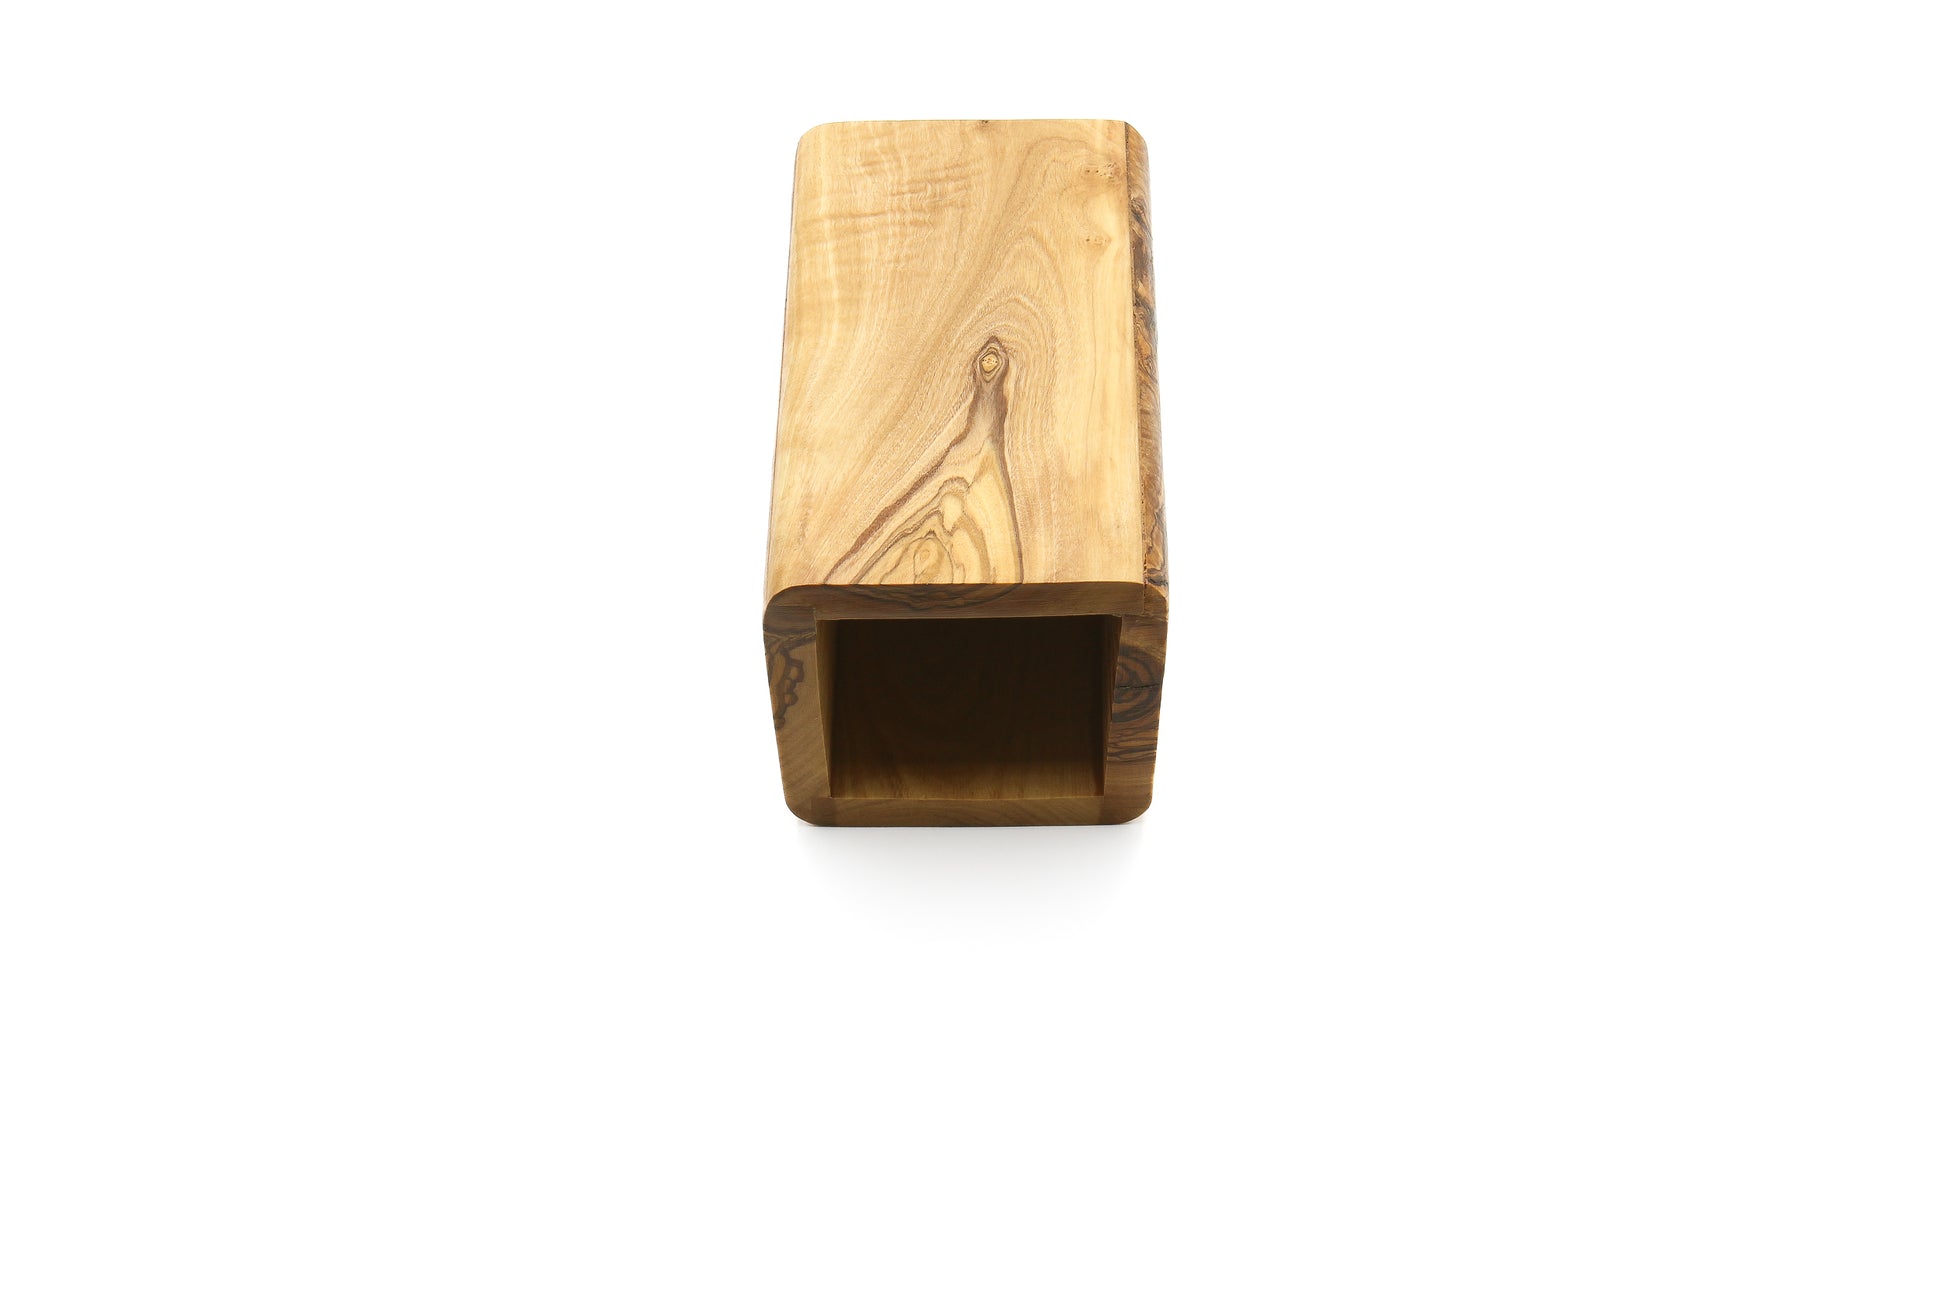 Rustic olive wood utensil holder with a vintage charm